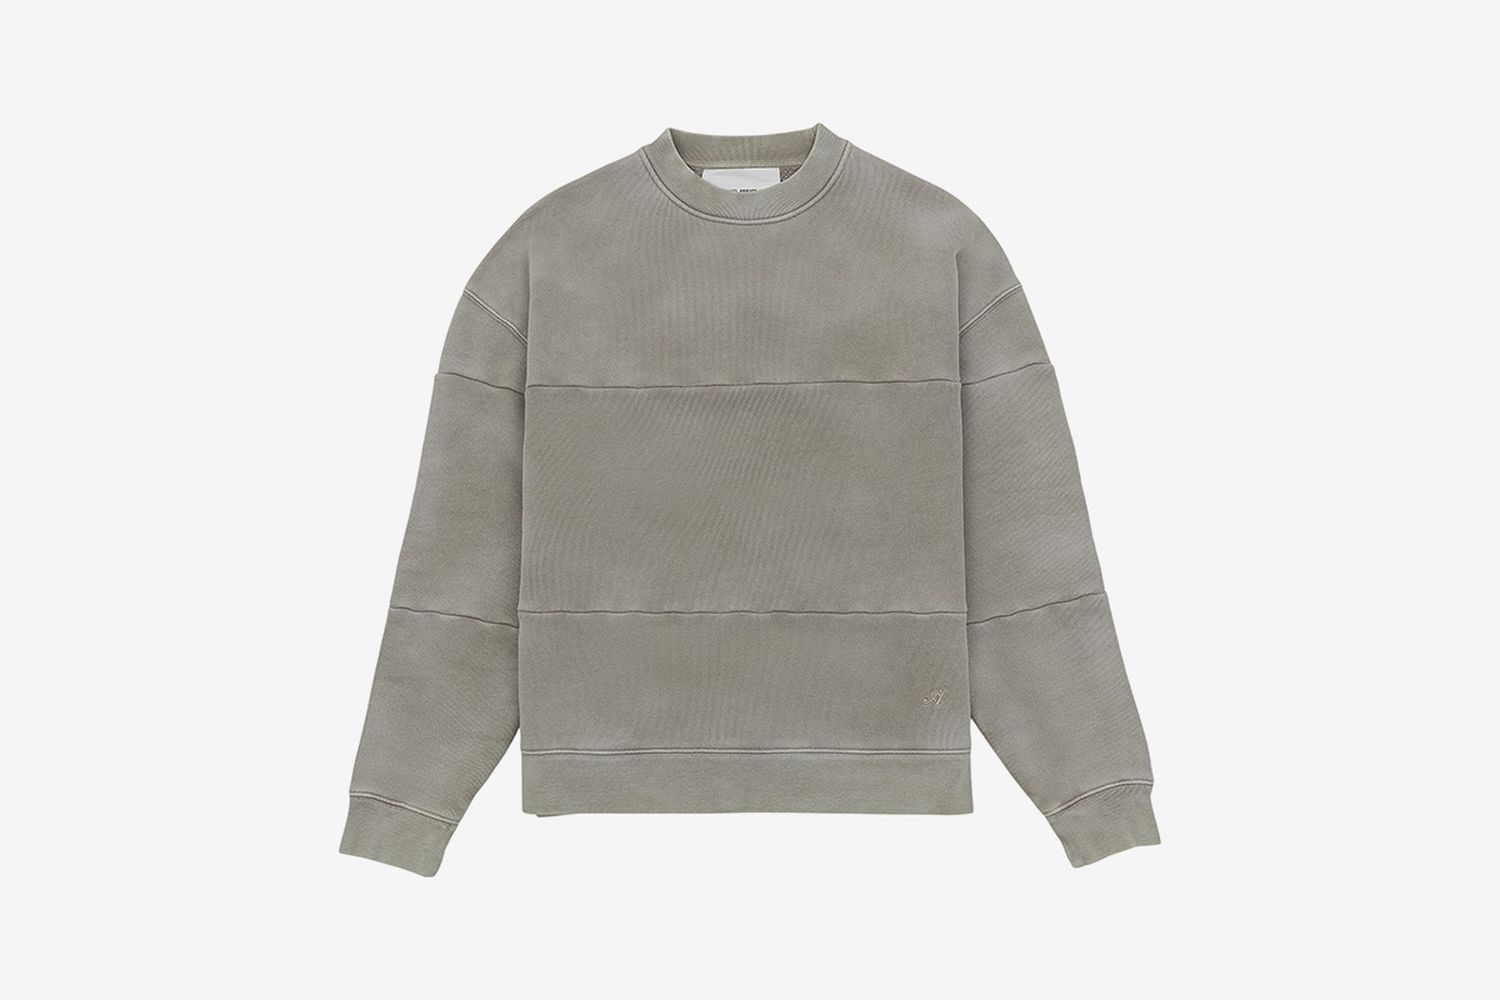 Our Search for the Ultimate Grey Crewneck Ends Here